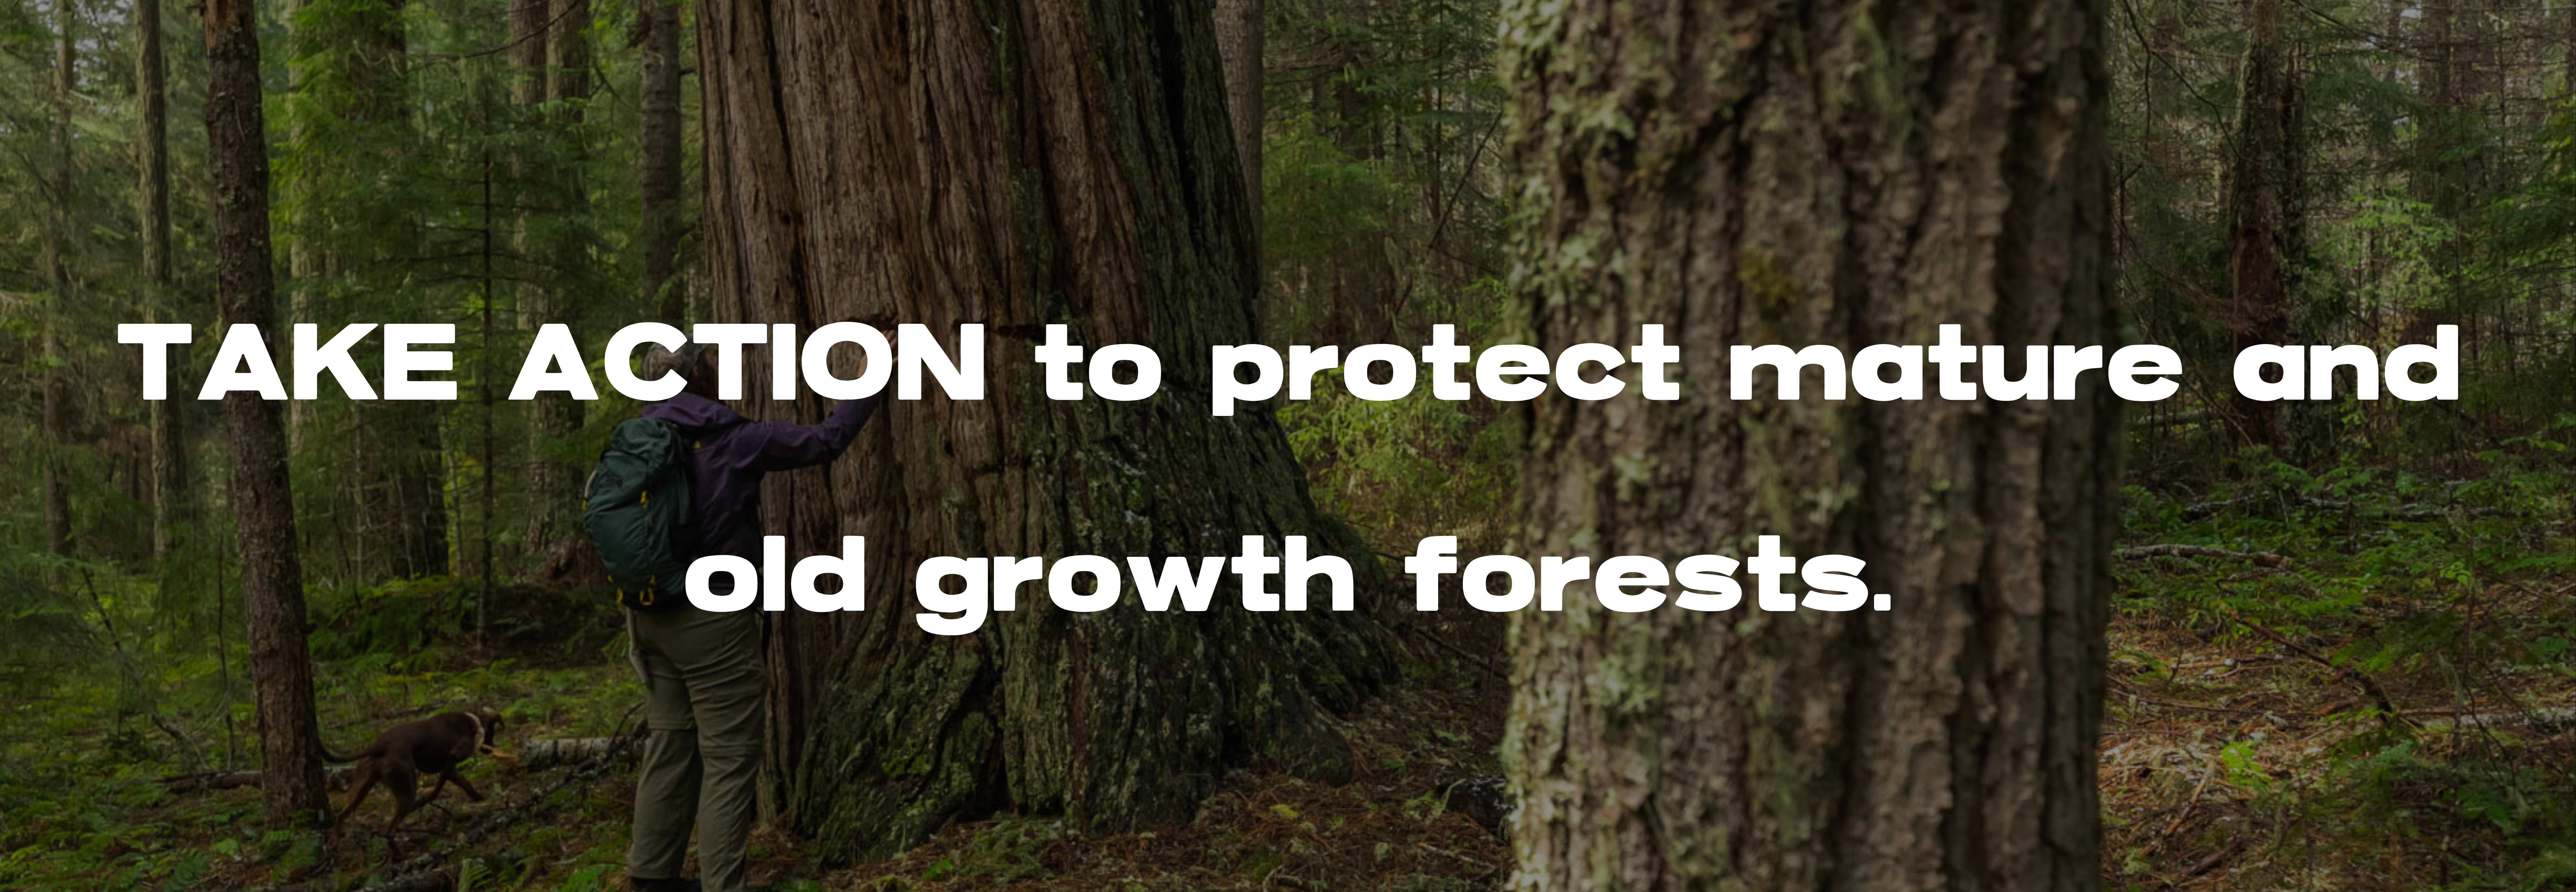 Copy of Copy of Copy of Copy of Copy of SLIDER_TAKE ACTION Future of PNW Forests (2600 x 900 px) (1)